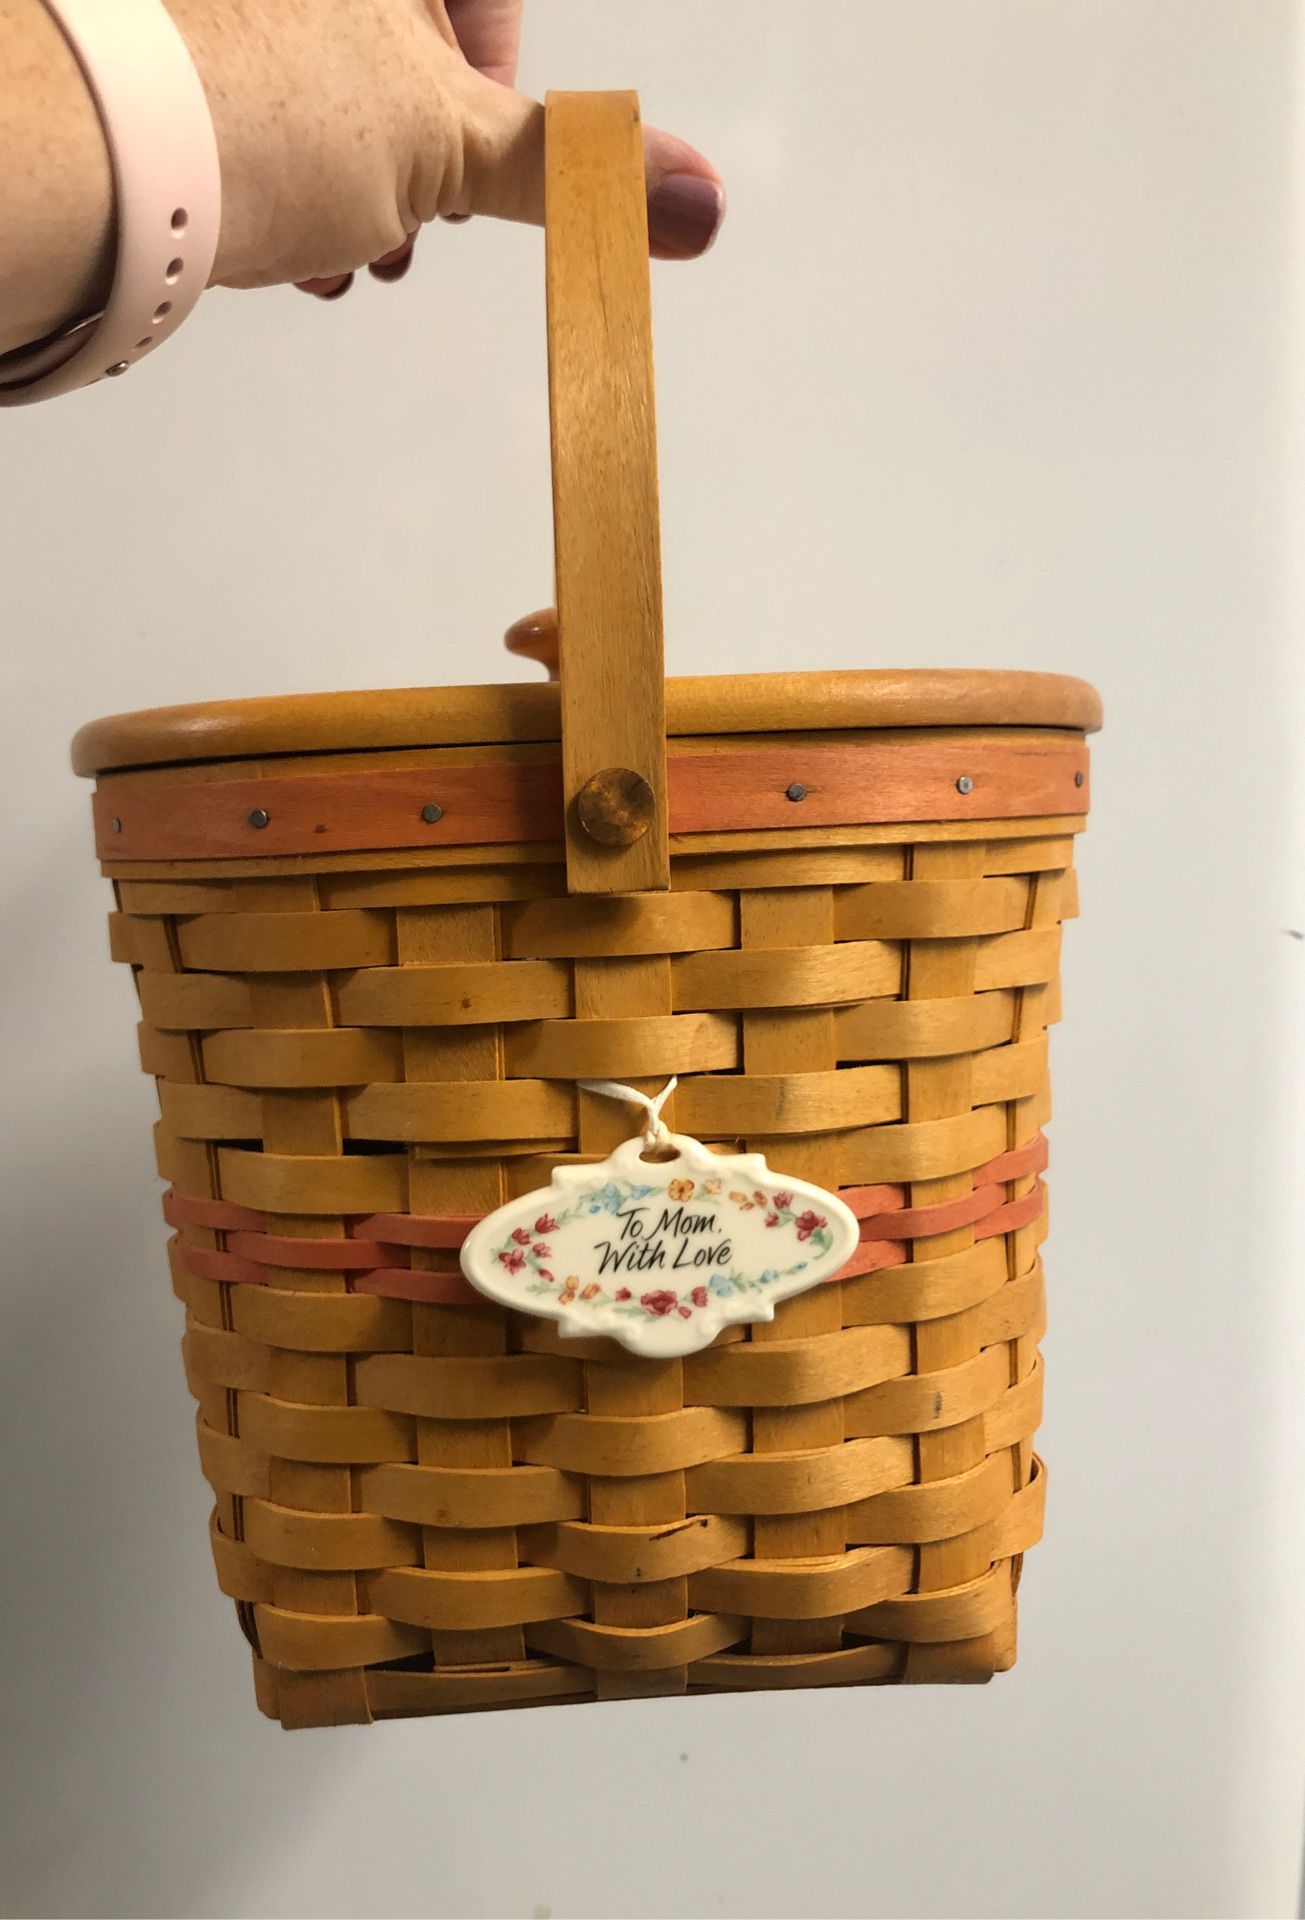 Longaberger to mom with love basket 2001